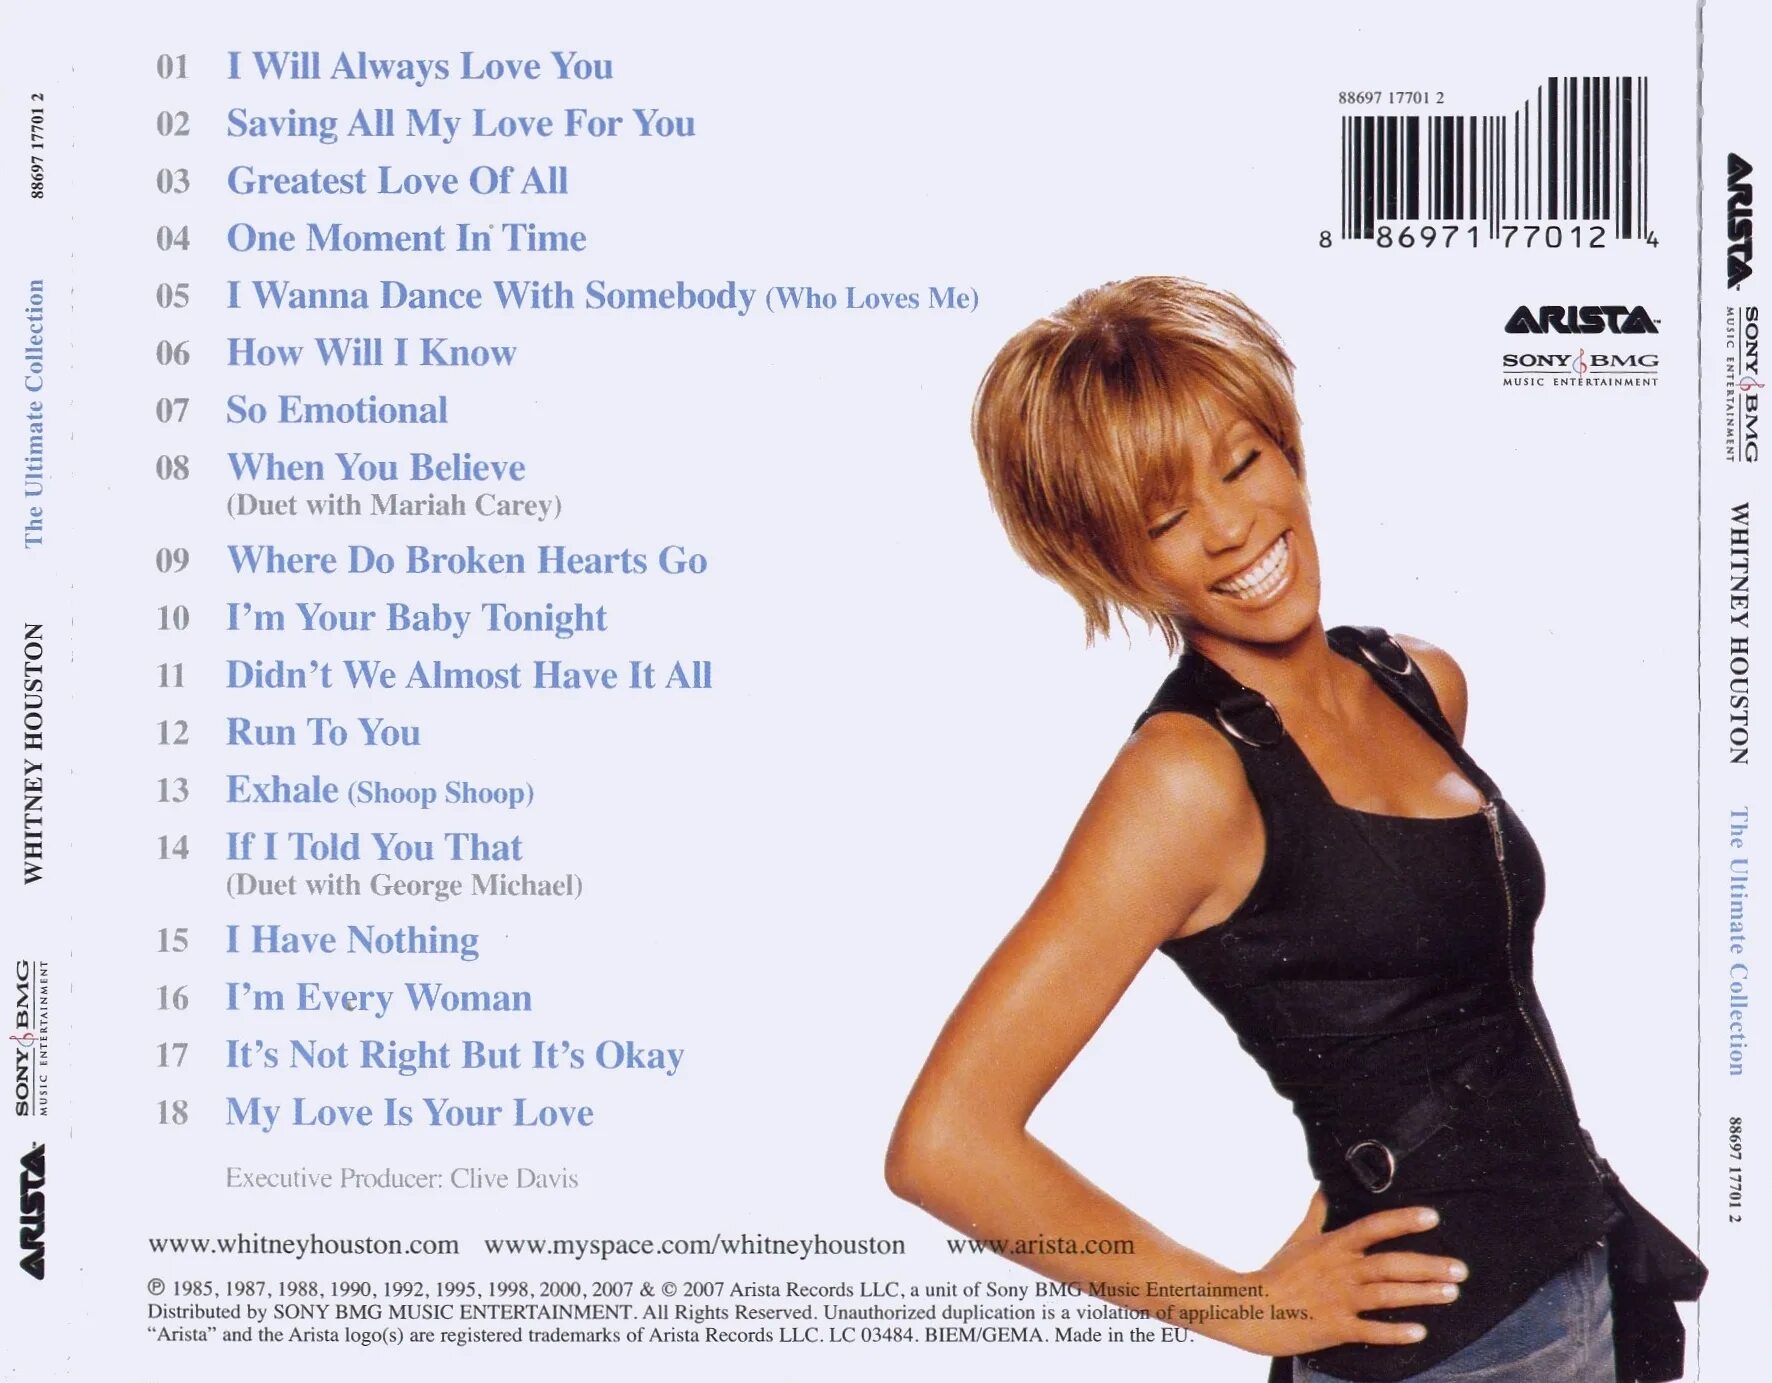 Whitney Houston the Ultimate collection. Whitney Houston 1985 обложка. Whitney Houston 2007 - the Ultimate collection обложка альбома. Whitney Houston Greatest Hits 2cd.